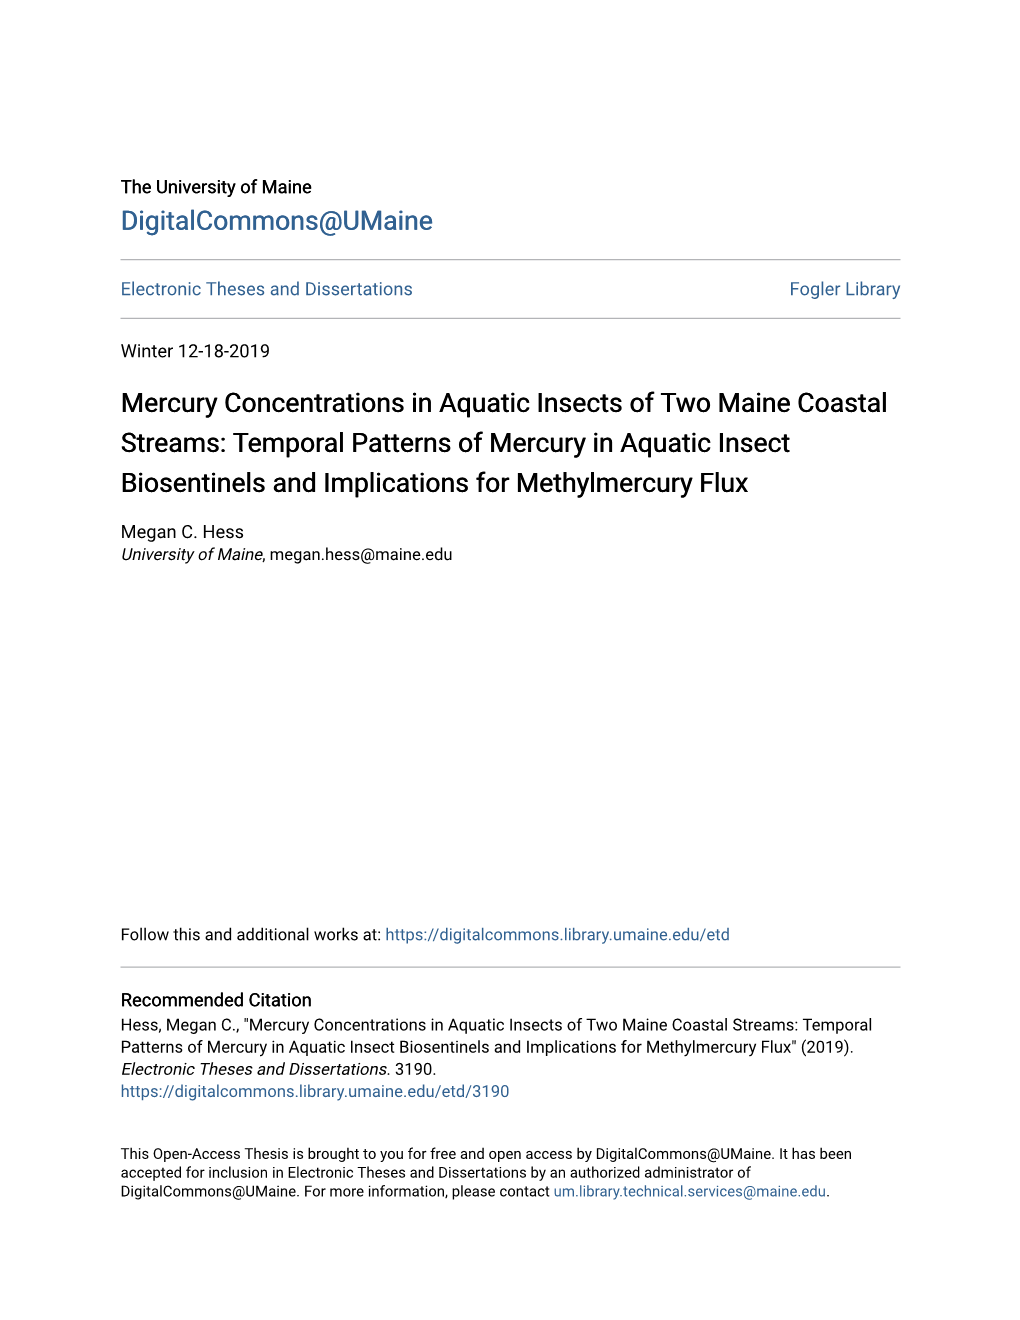 Mercury Concentrations in Aquatic Insects of Two Maine Coastal Streams